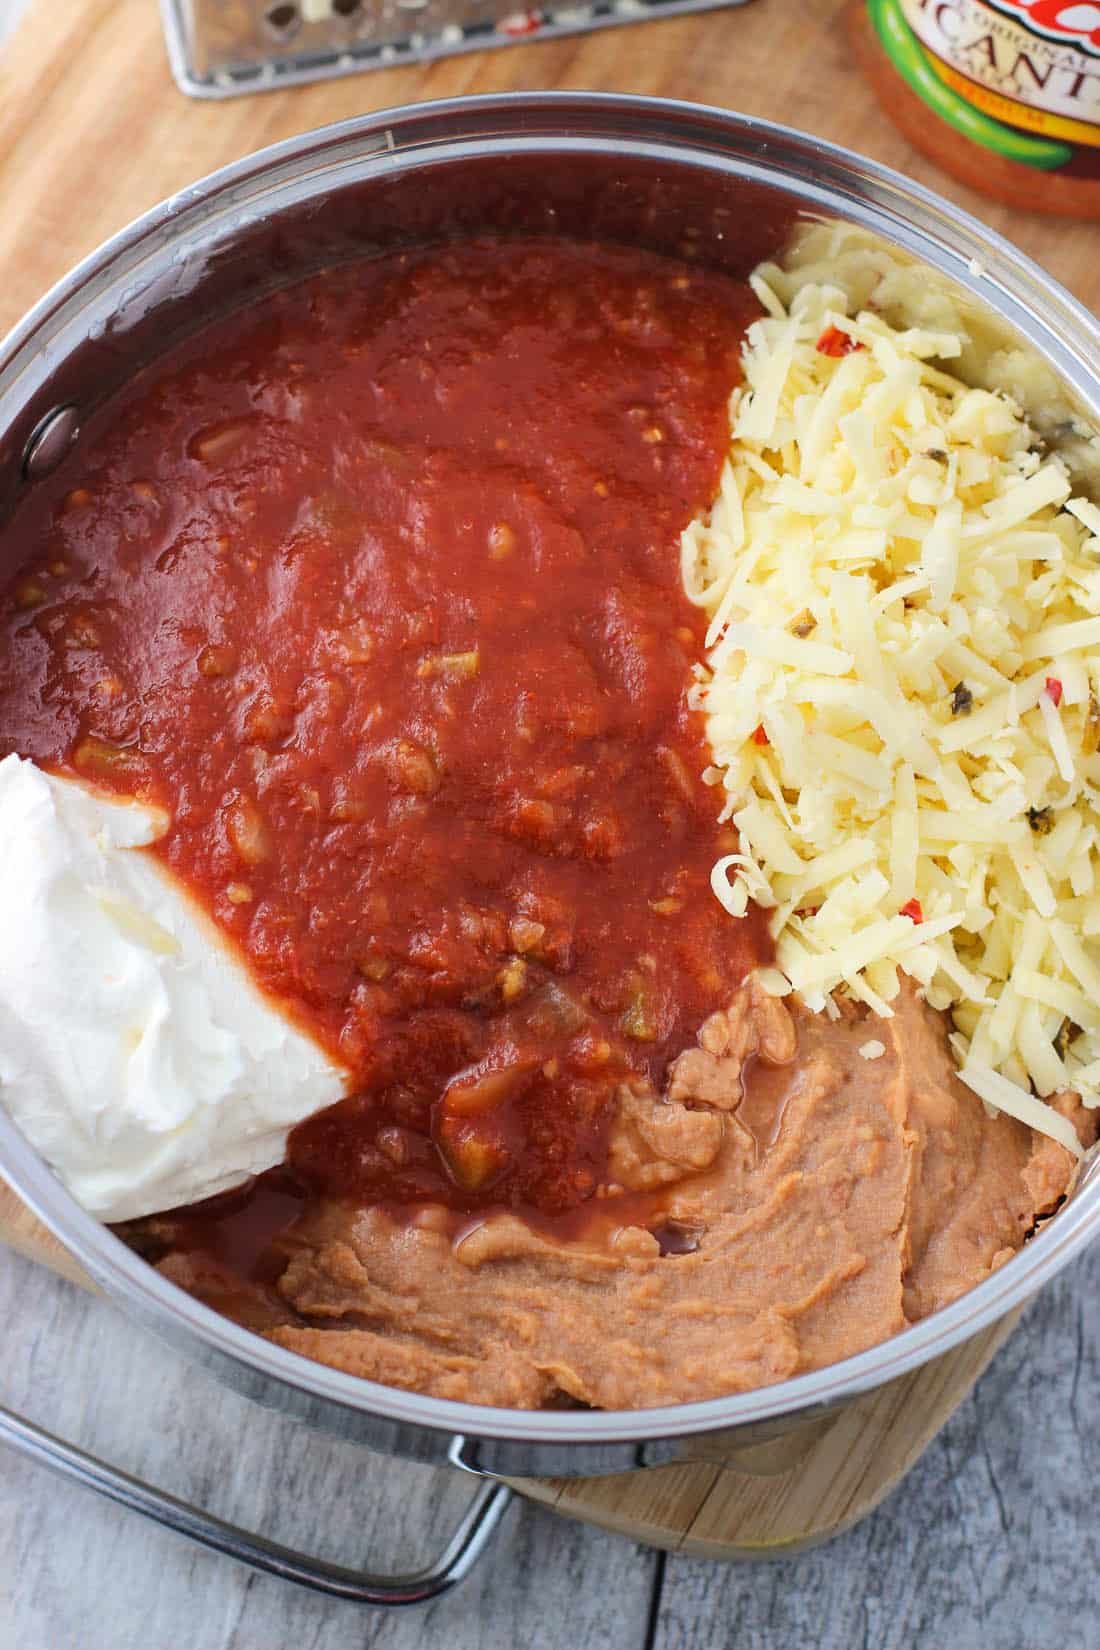 A medium saucepan filed with picante sauce, cream cheese, grated pepperjack cheese, and refried beans